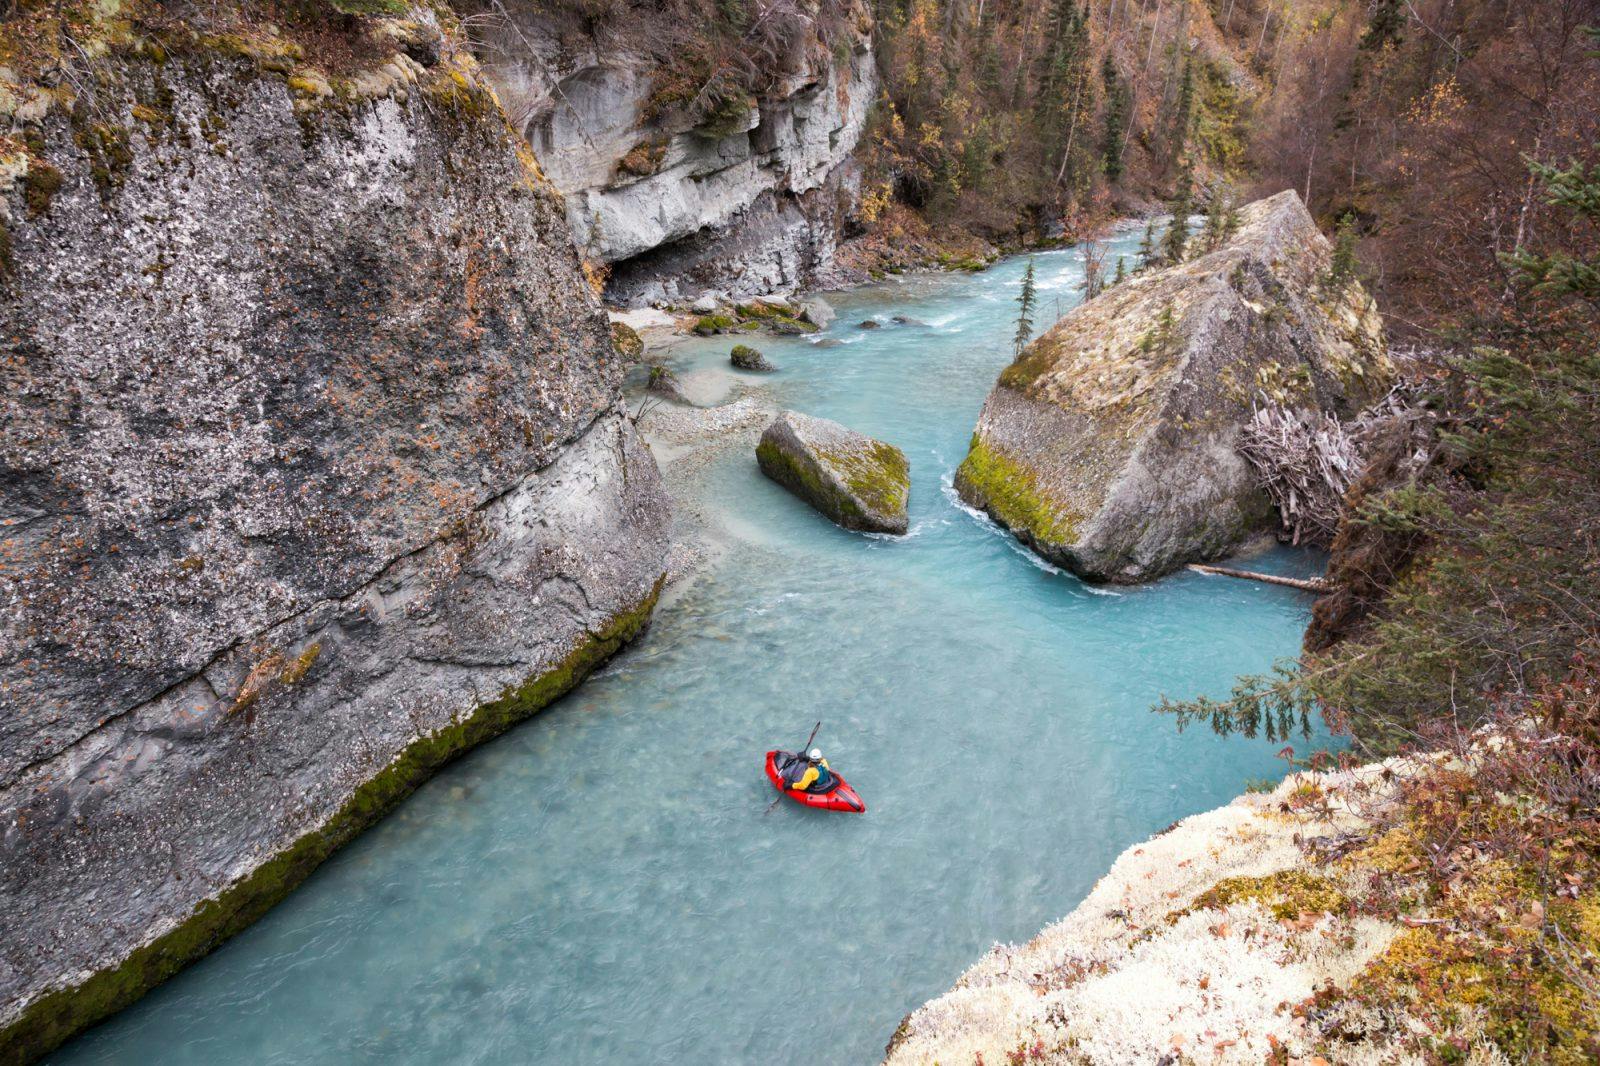 Sarah packrafting on the Chickaloon. Photo by Luc Mehl.